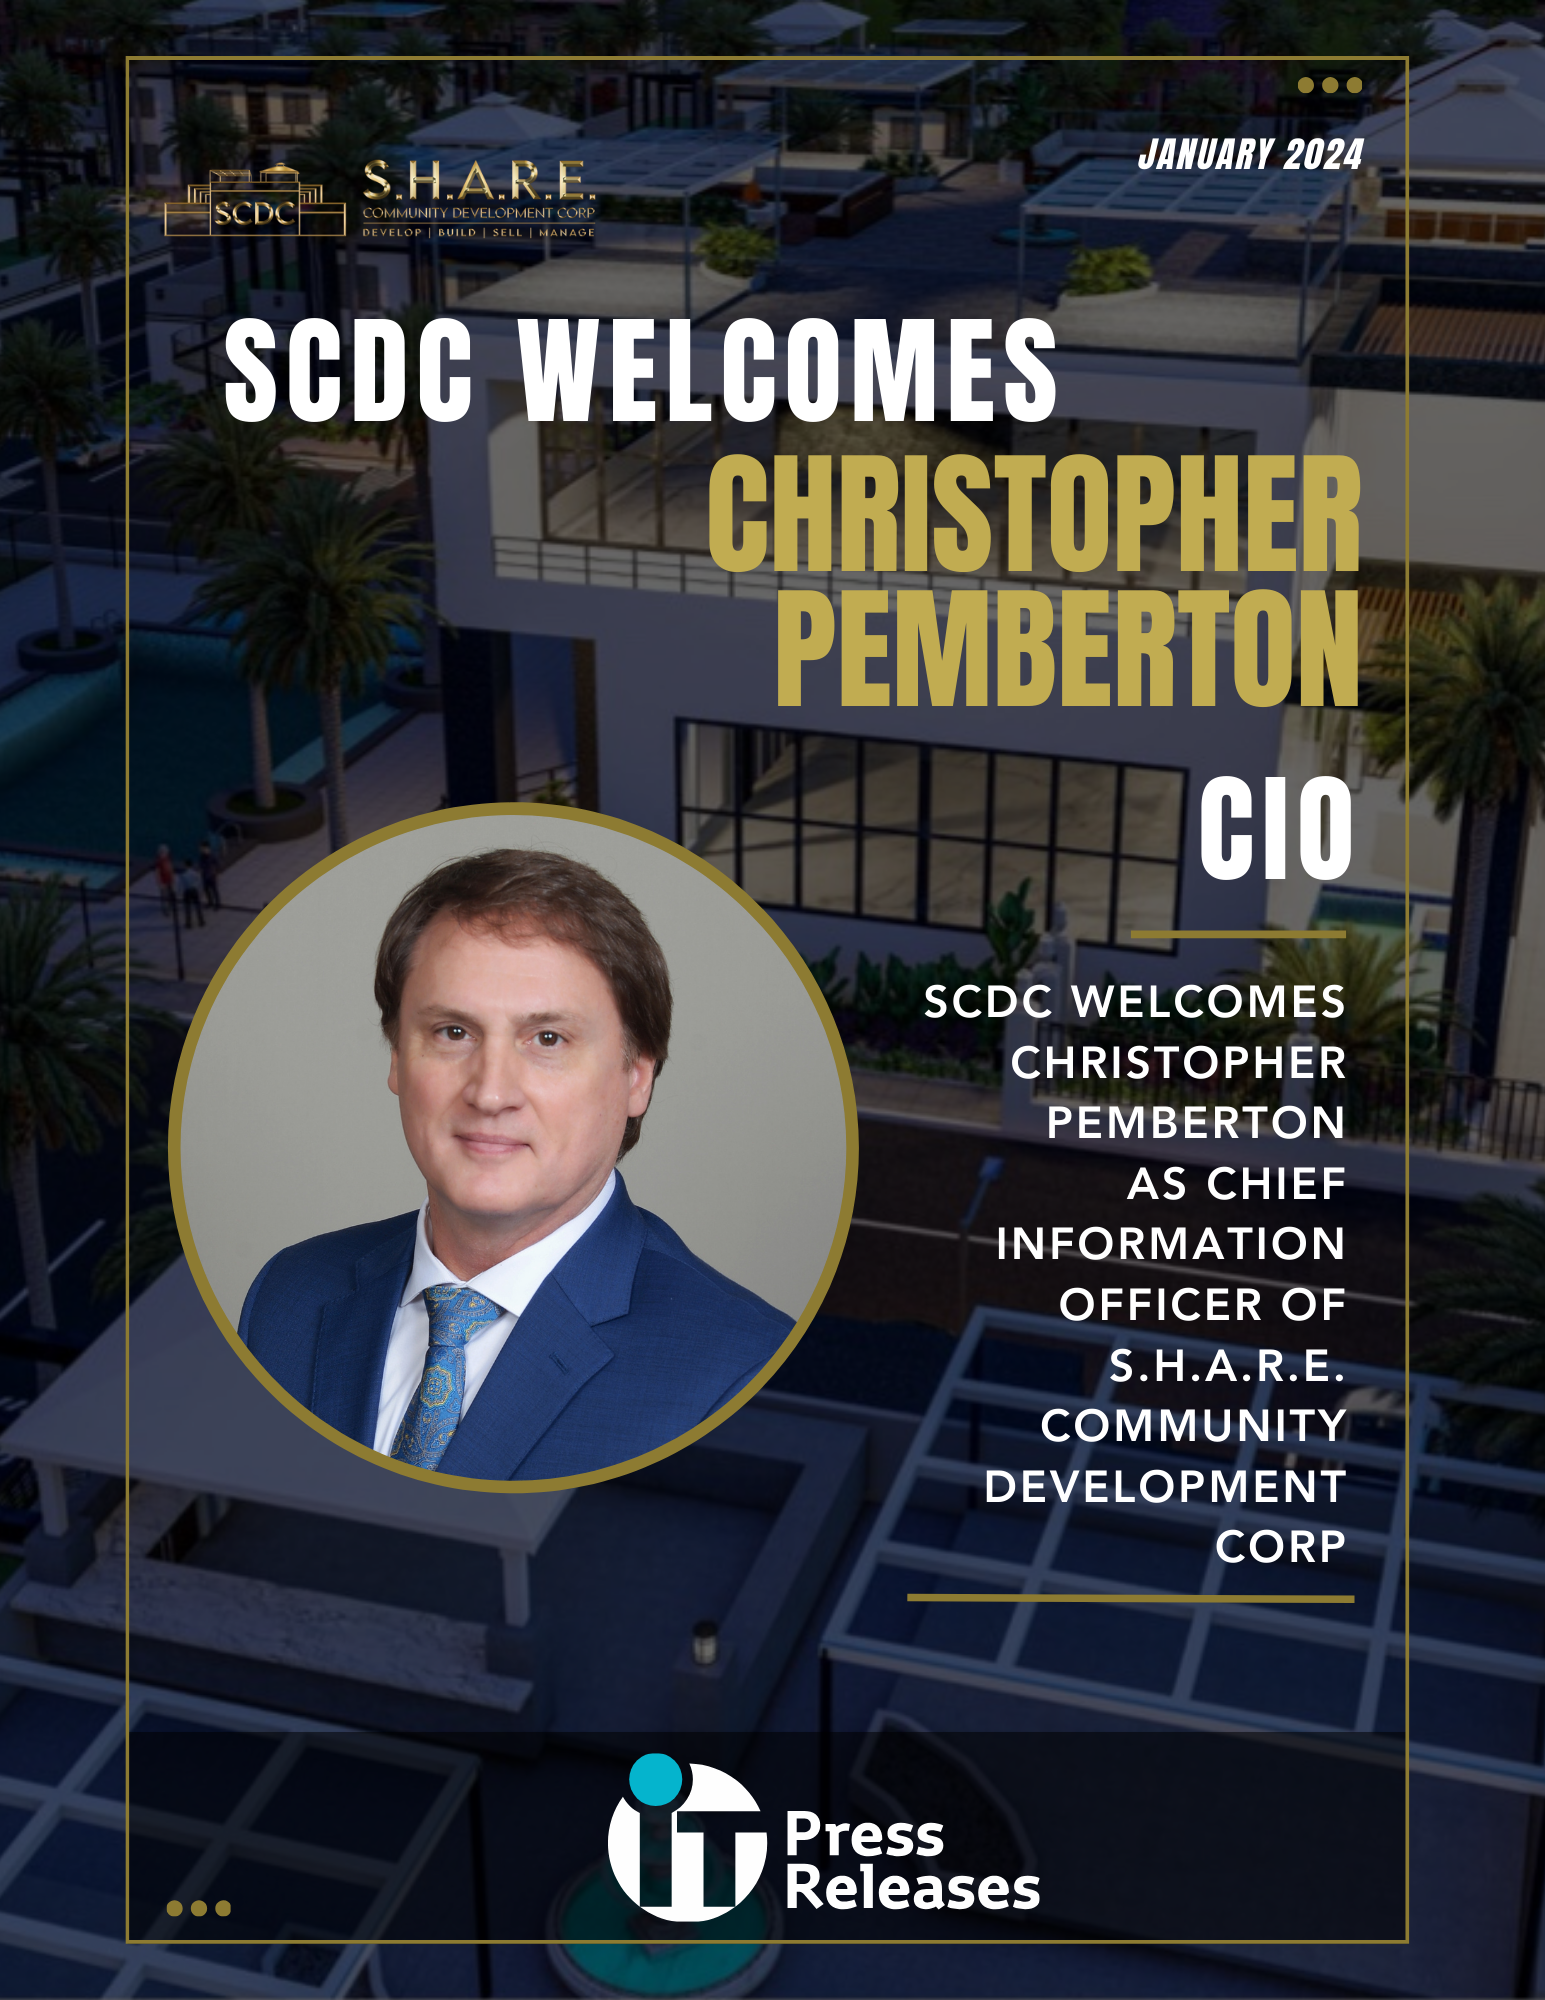 SCDC Welcomes Christopher Pemberton as Senior VP & Head of Information Technology to Drive Digital Transformation